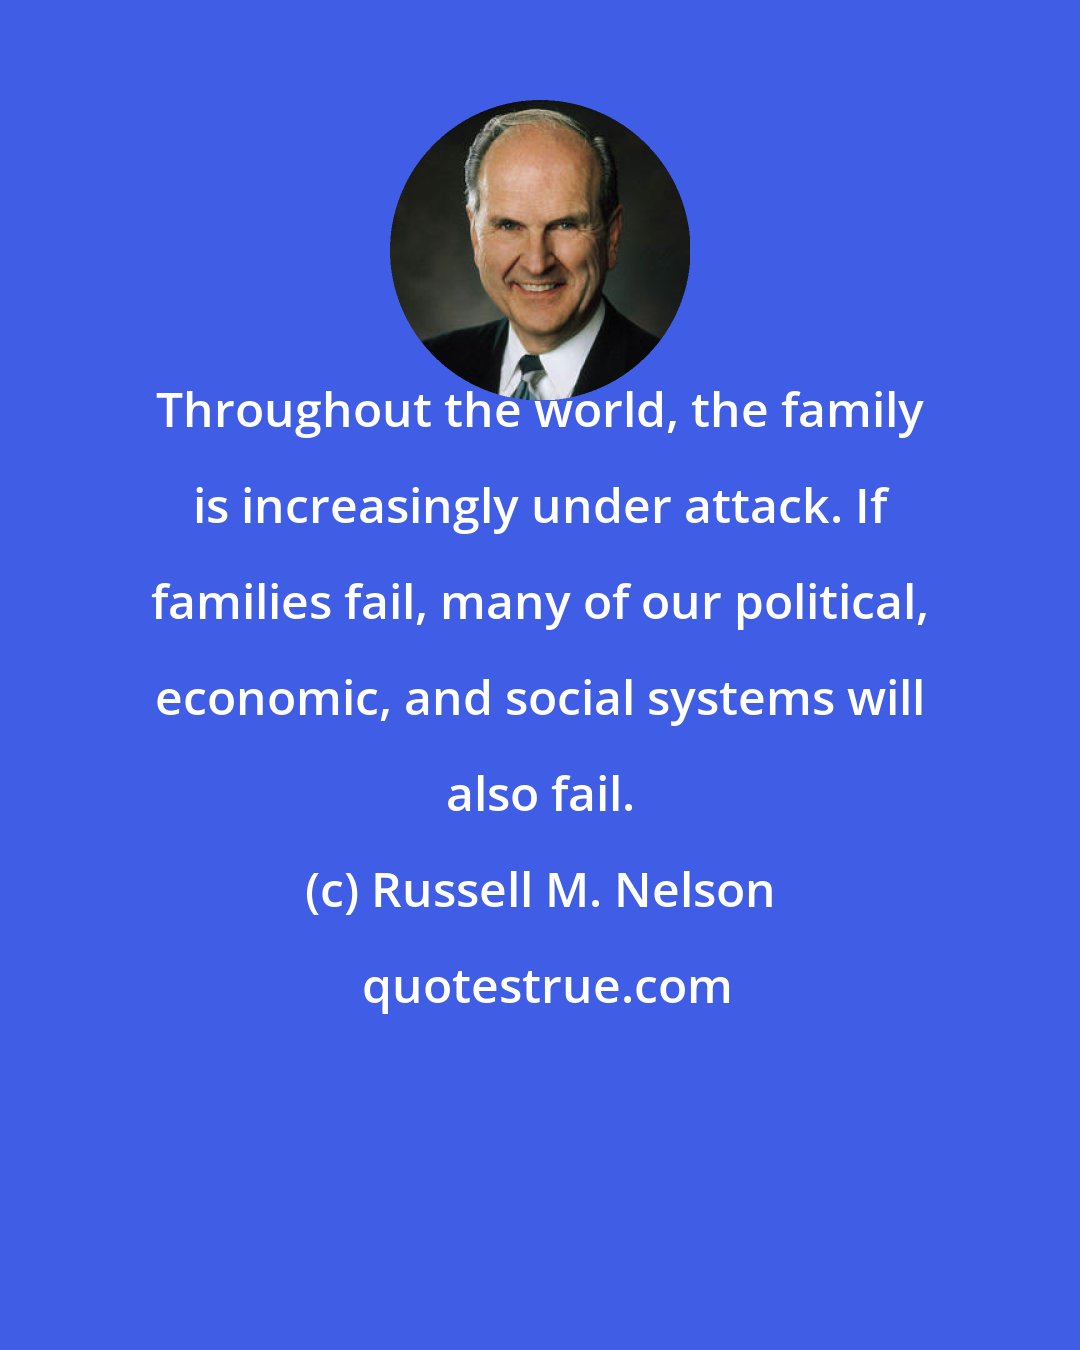 Russell M. Nelson: Throughout the world, the family is increasingly under attack. If families fail, many of our political, economic, and social systems will also fail.